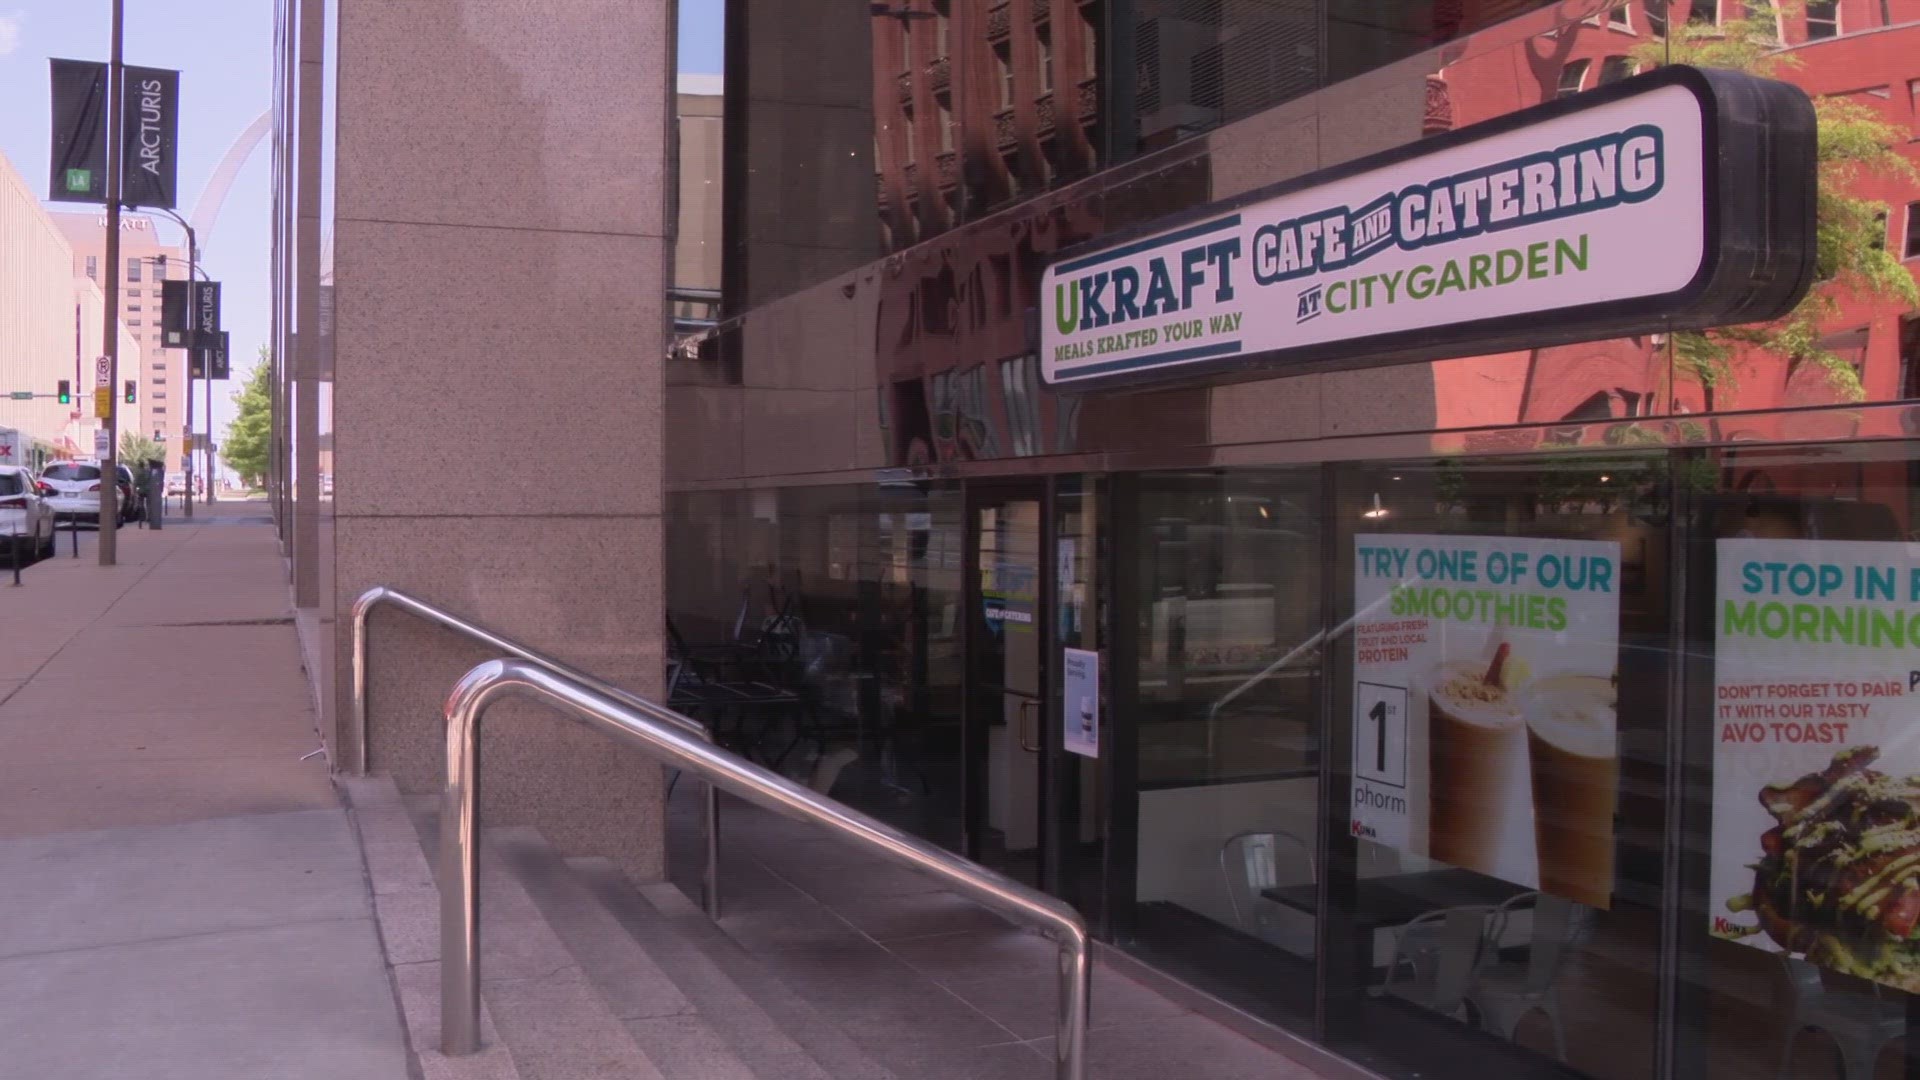 Ukraft Cafe is relocating to a larger space in downtown St. Louis. The  move will triple its physical footprint and provide a hefty boost to its top line.